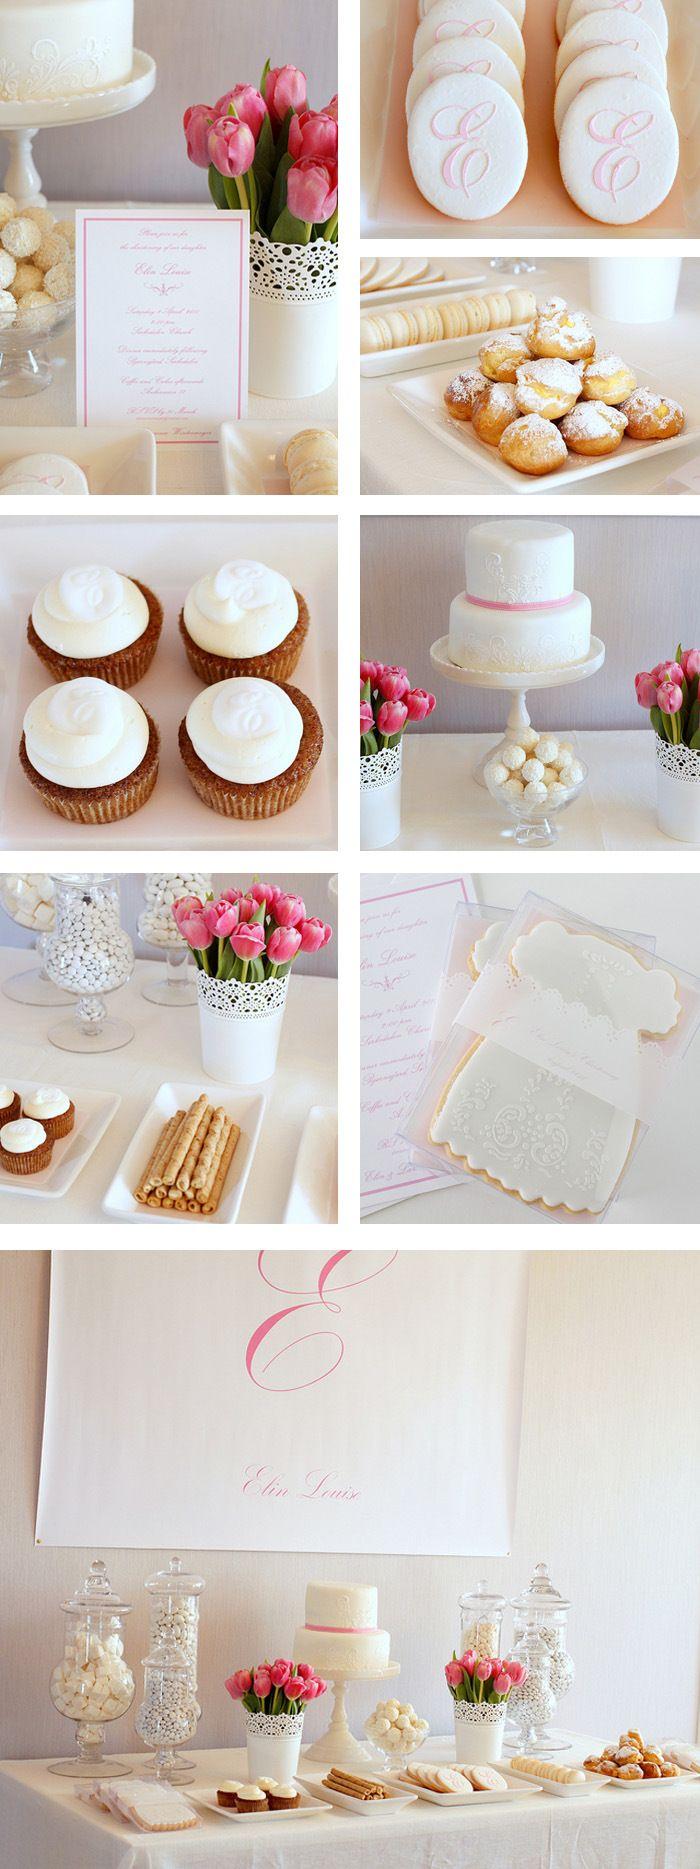 Wedding - Lace And Embroidery Guest Dessert Feature